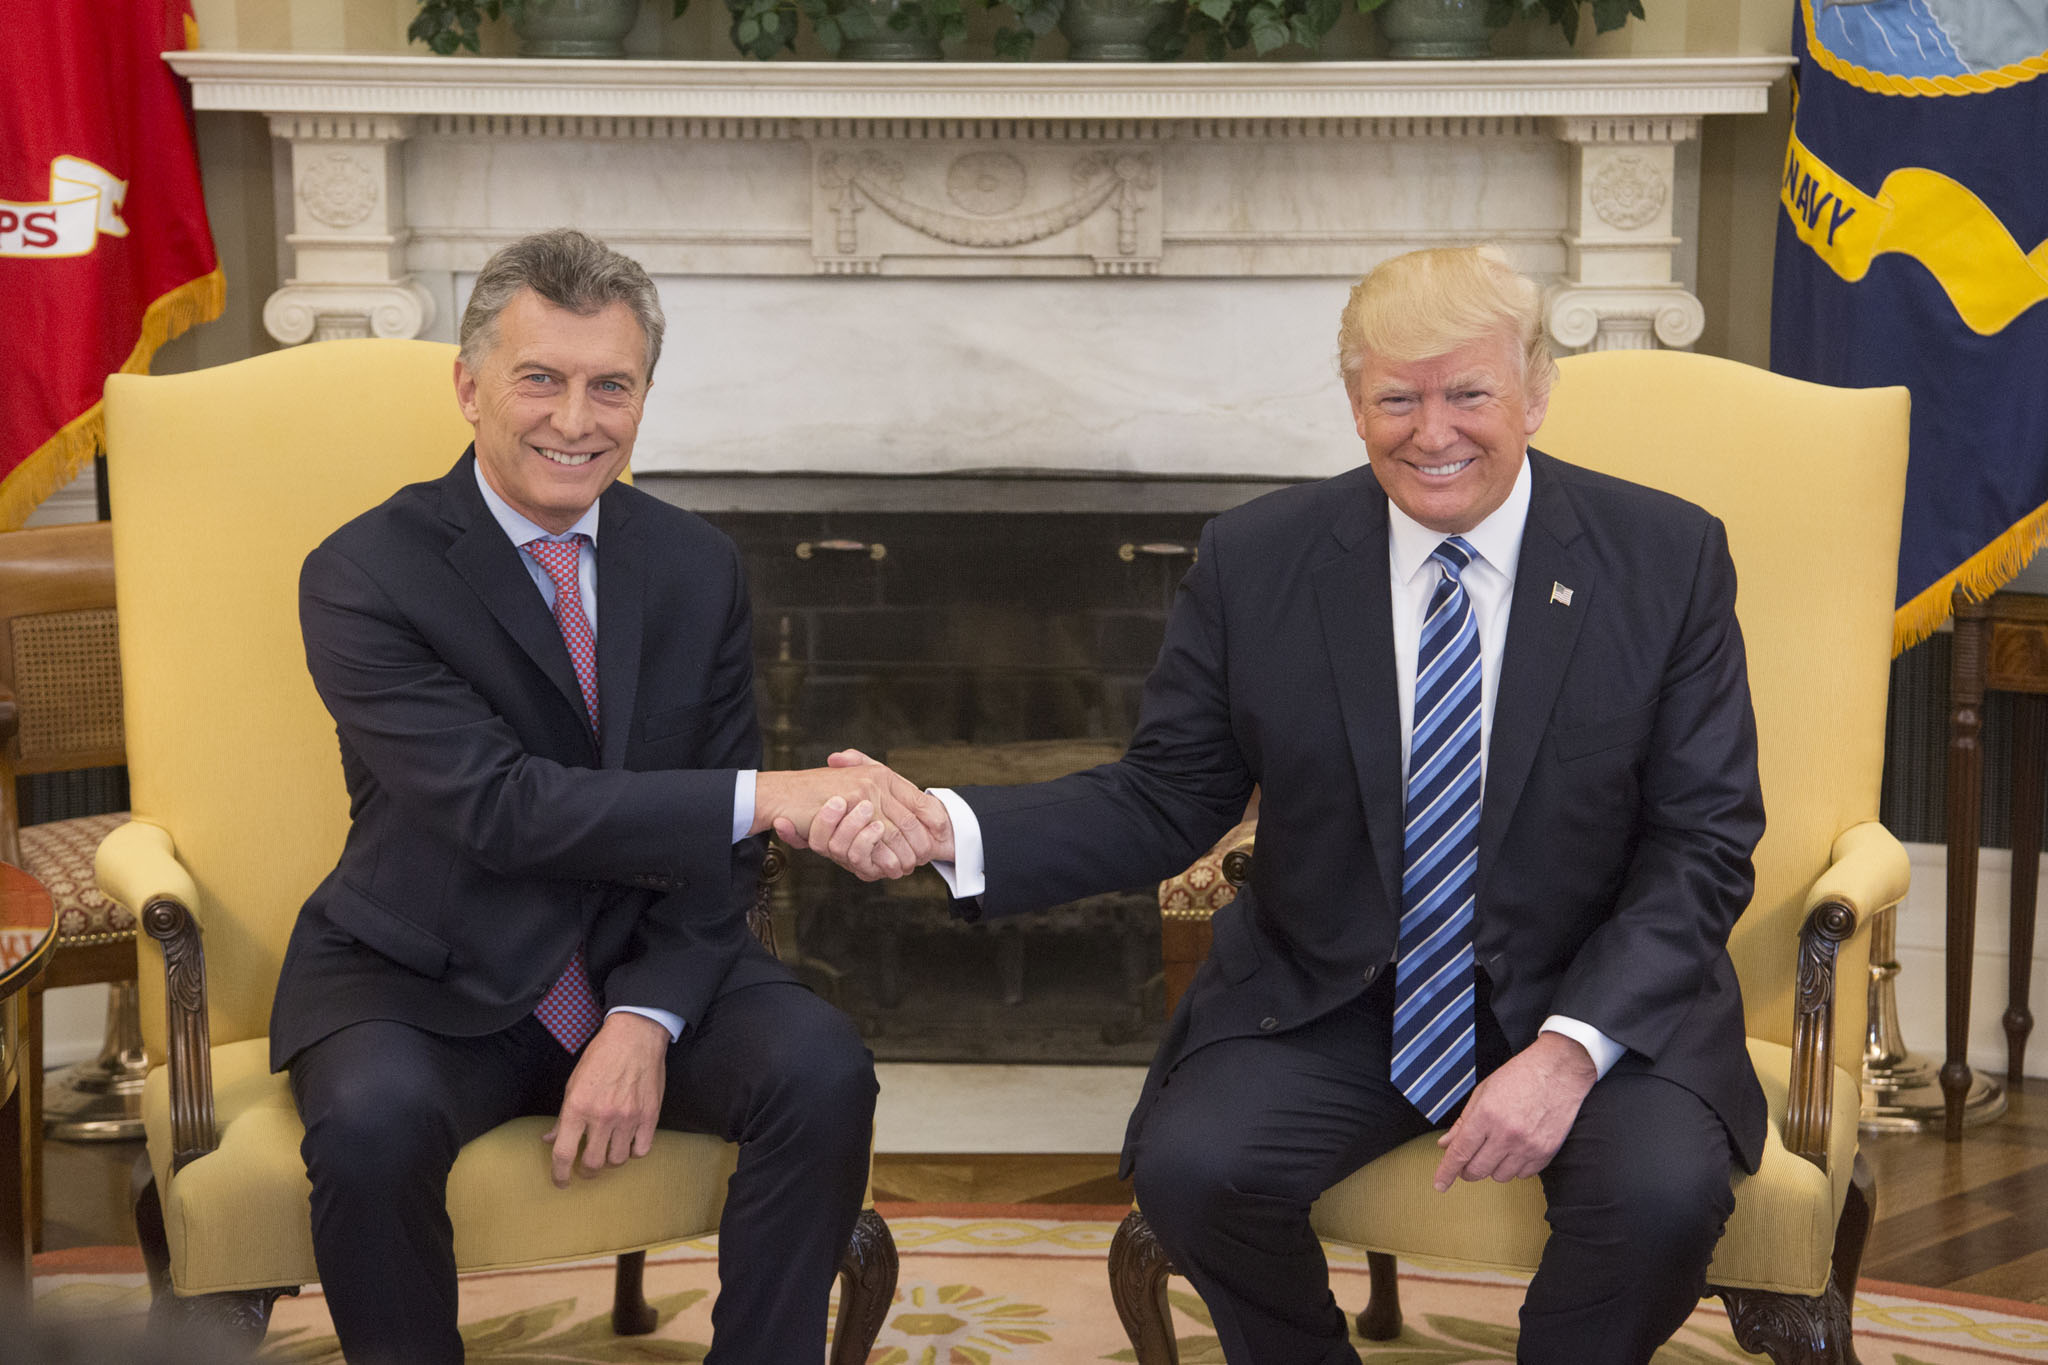 Donald Trump and Mauricio Macri in the Oval Office, April 27, 2017